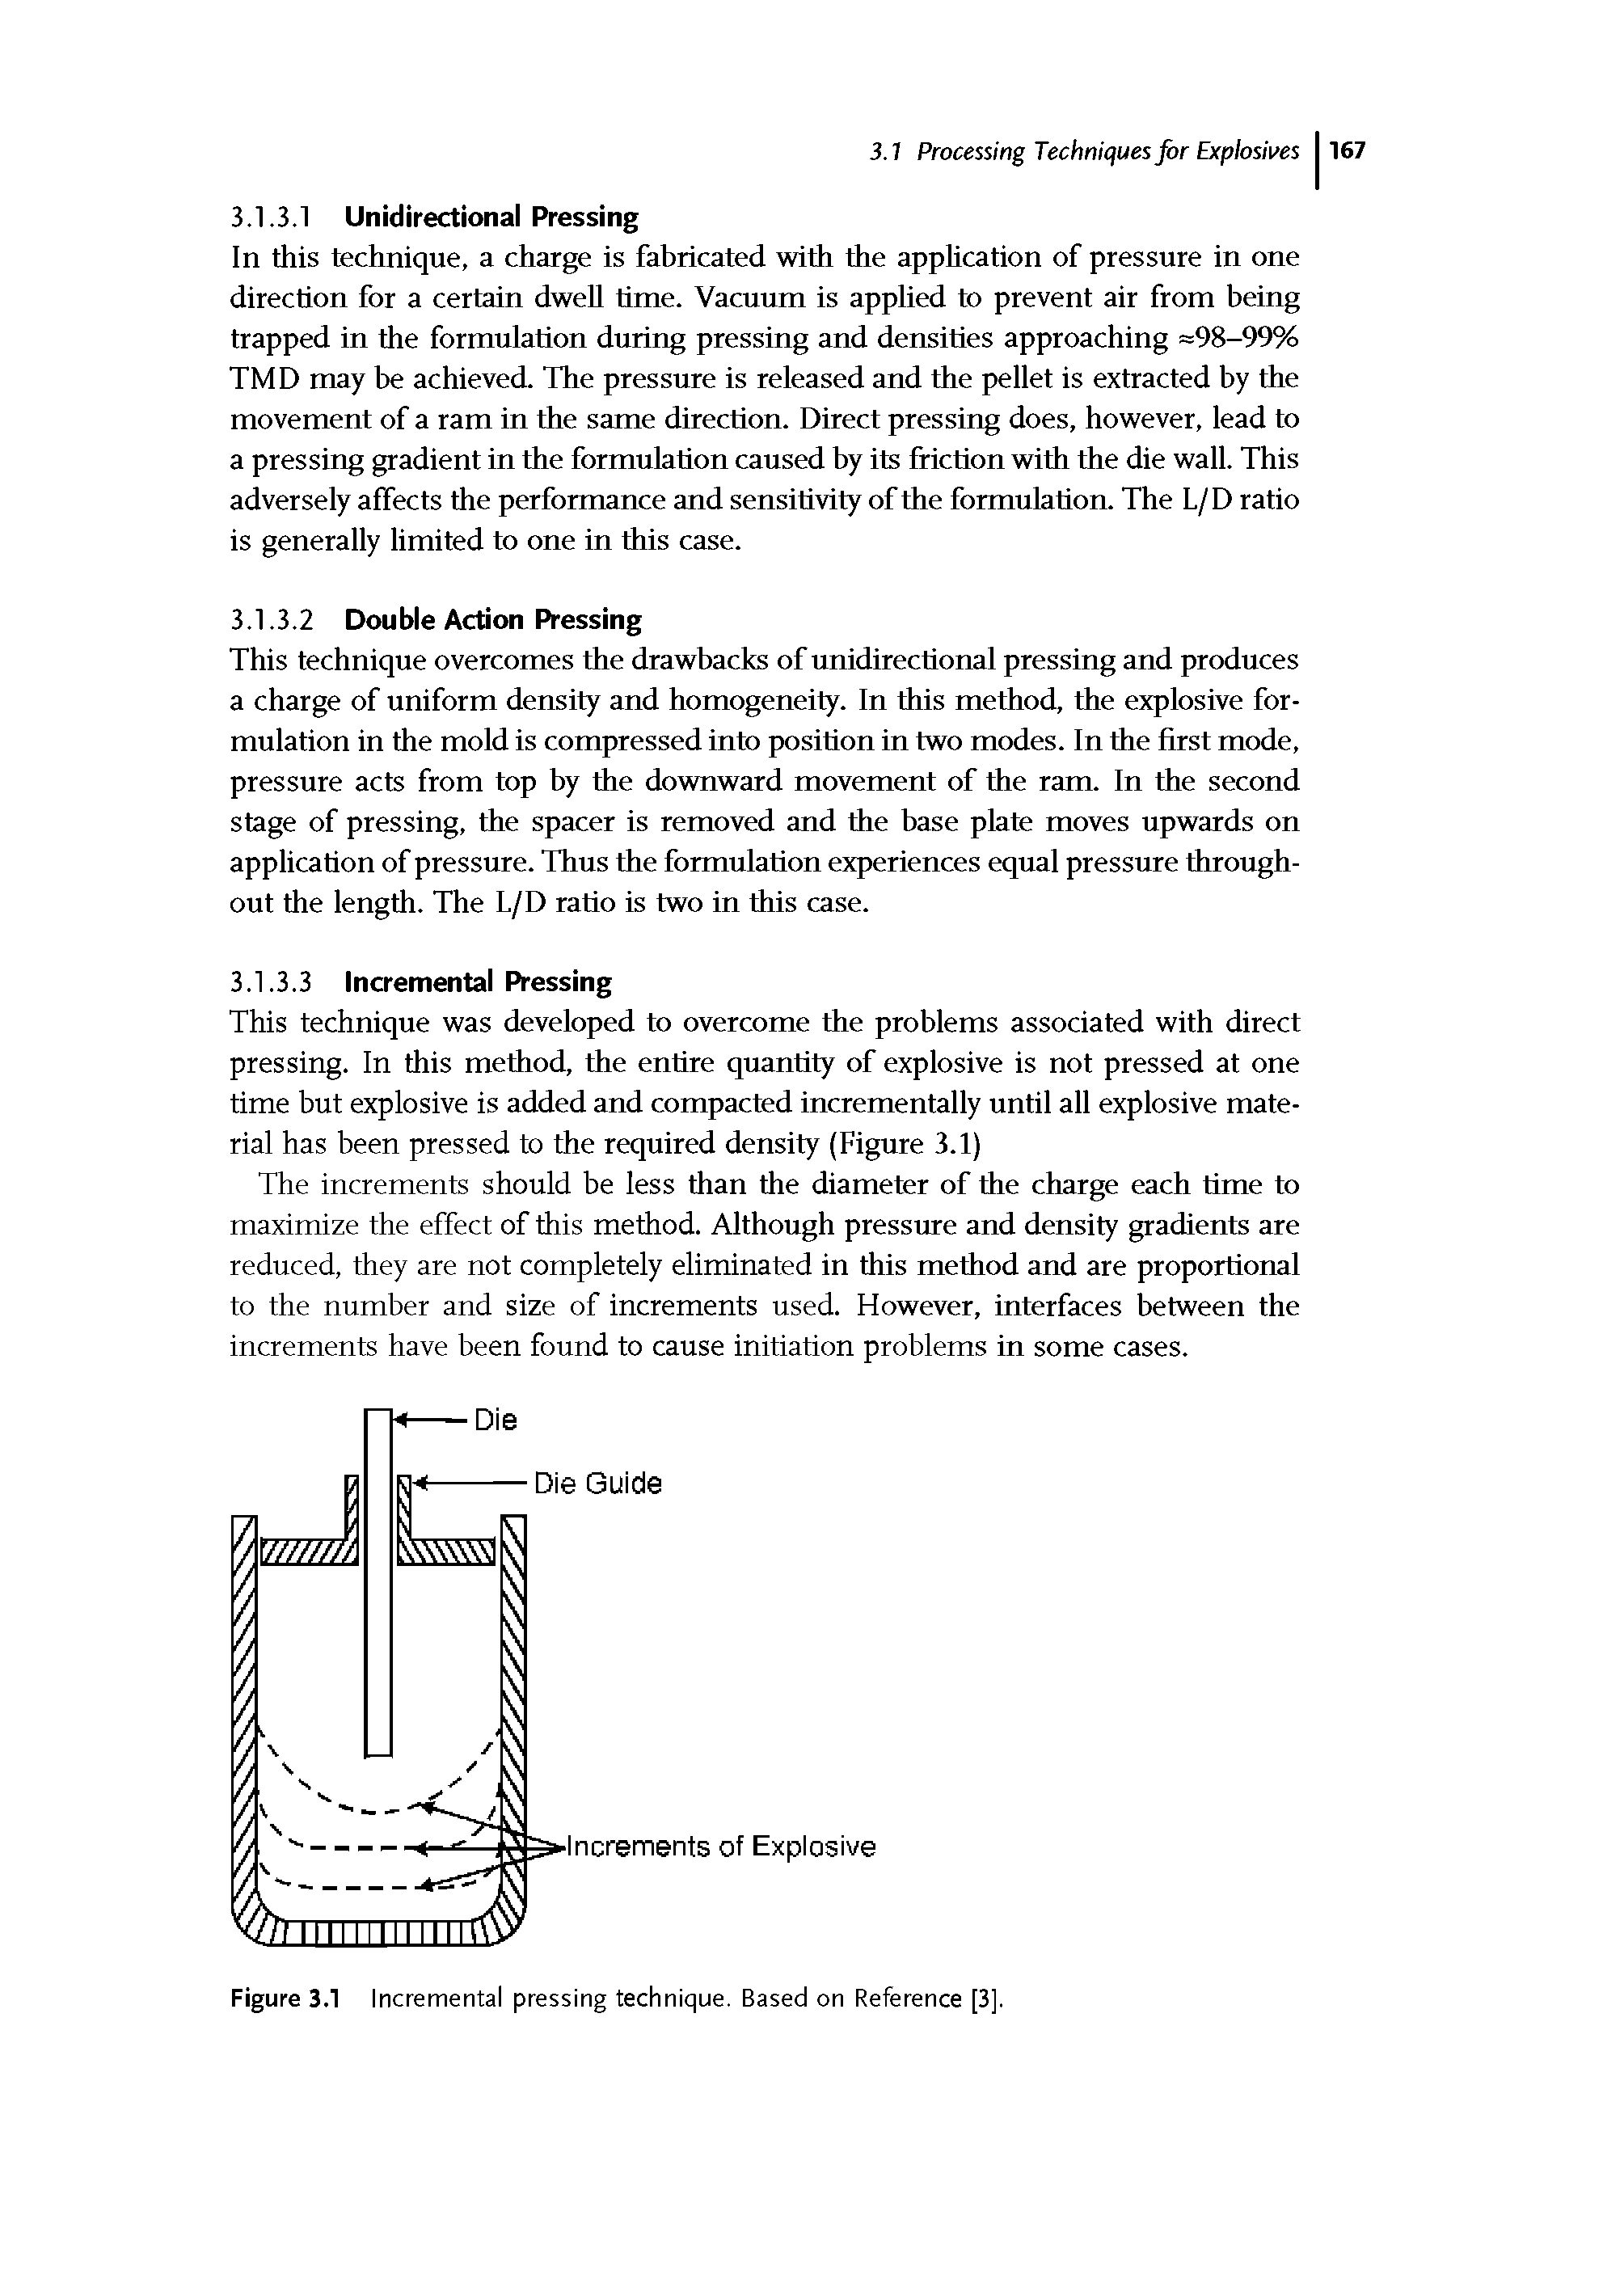 Figure 3.1 Incremental pressing technique. Based on Reference [3].